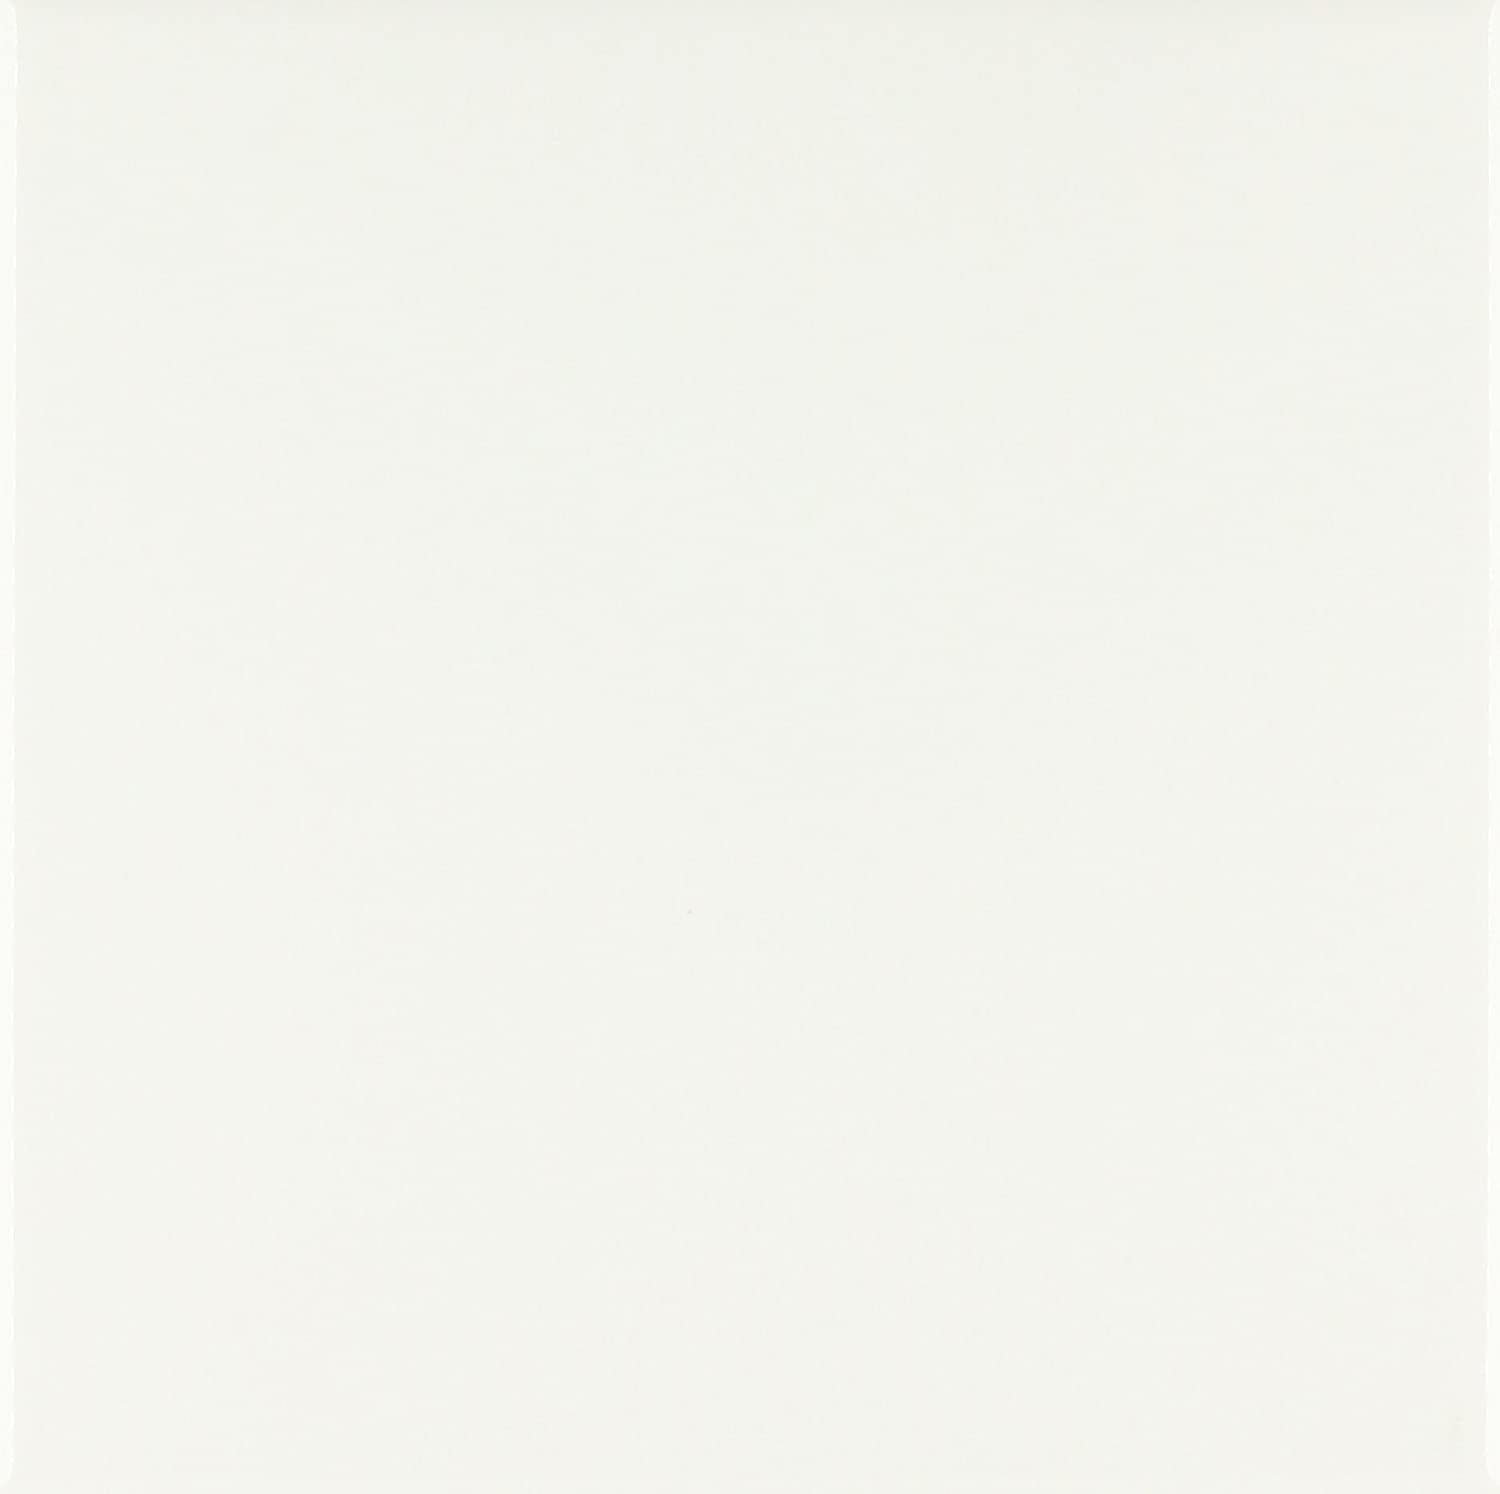 8-Inch 3dRose ct_159881_3 Pure White Bright Colorless Plain Simple One Single Solid White Color Ceramic Tile